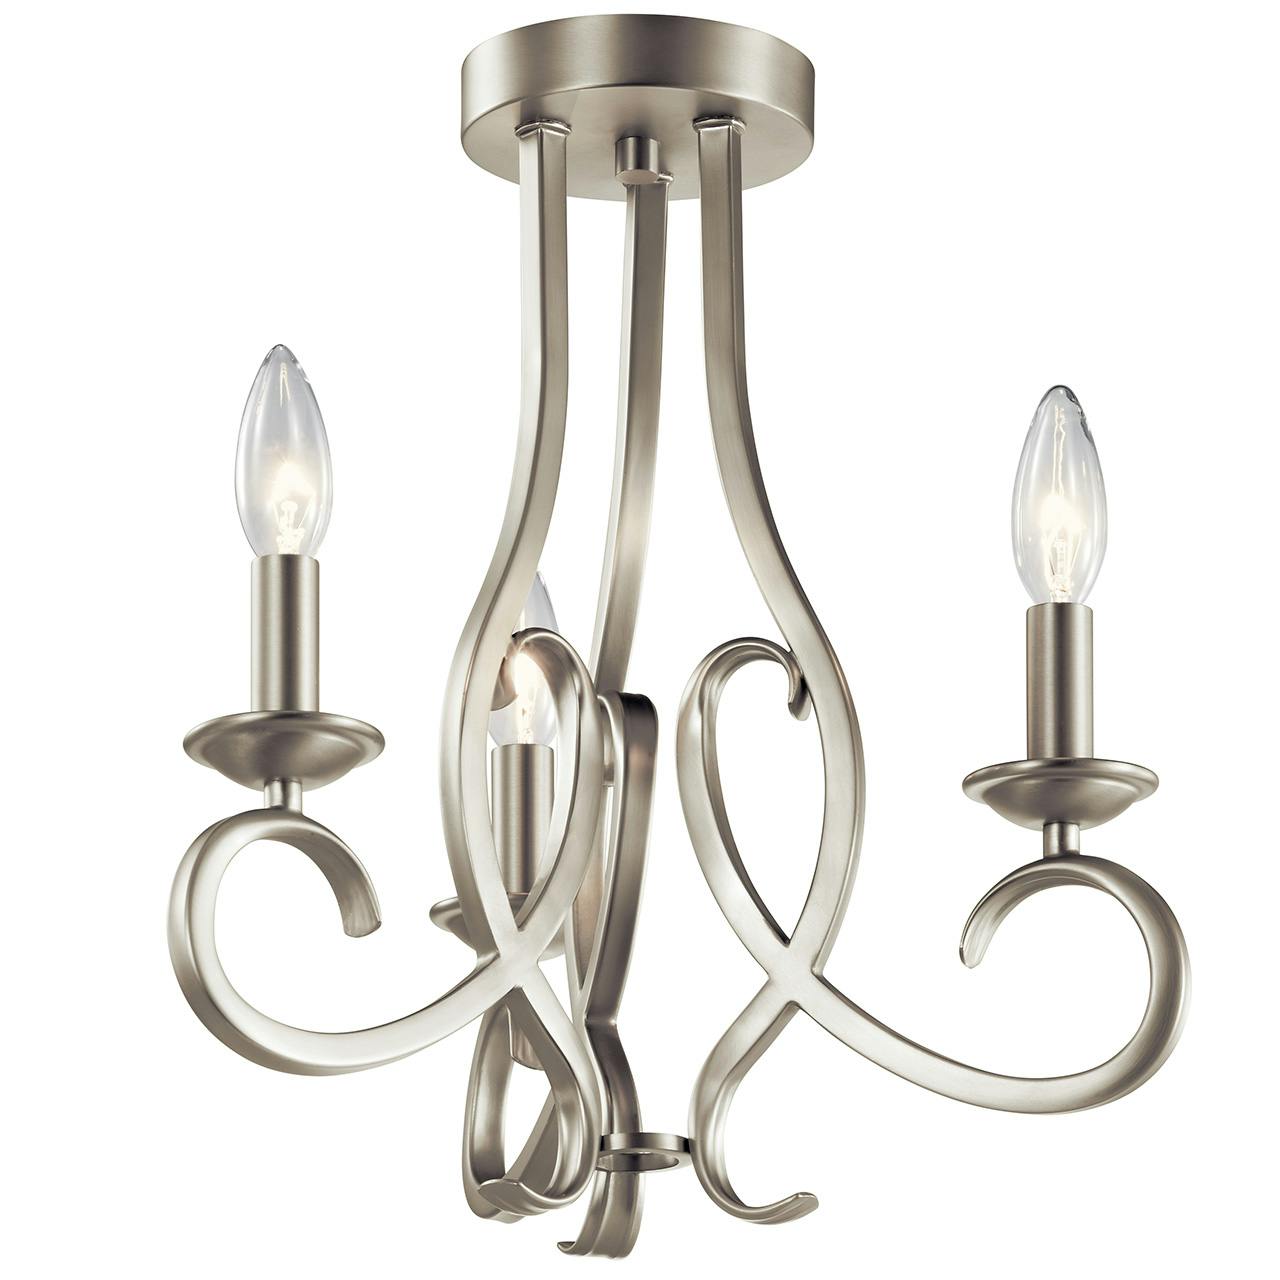 Ania 15" Convertible Chandelier Nickel shown as a semi-flush on a white background